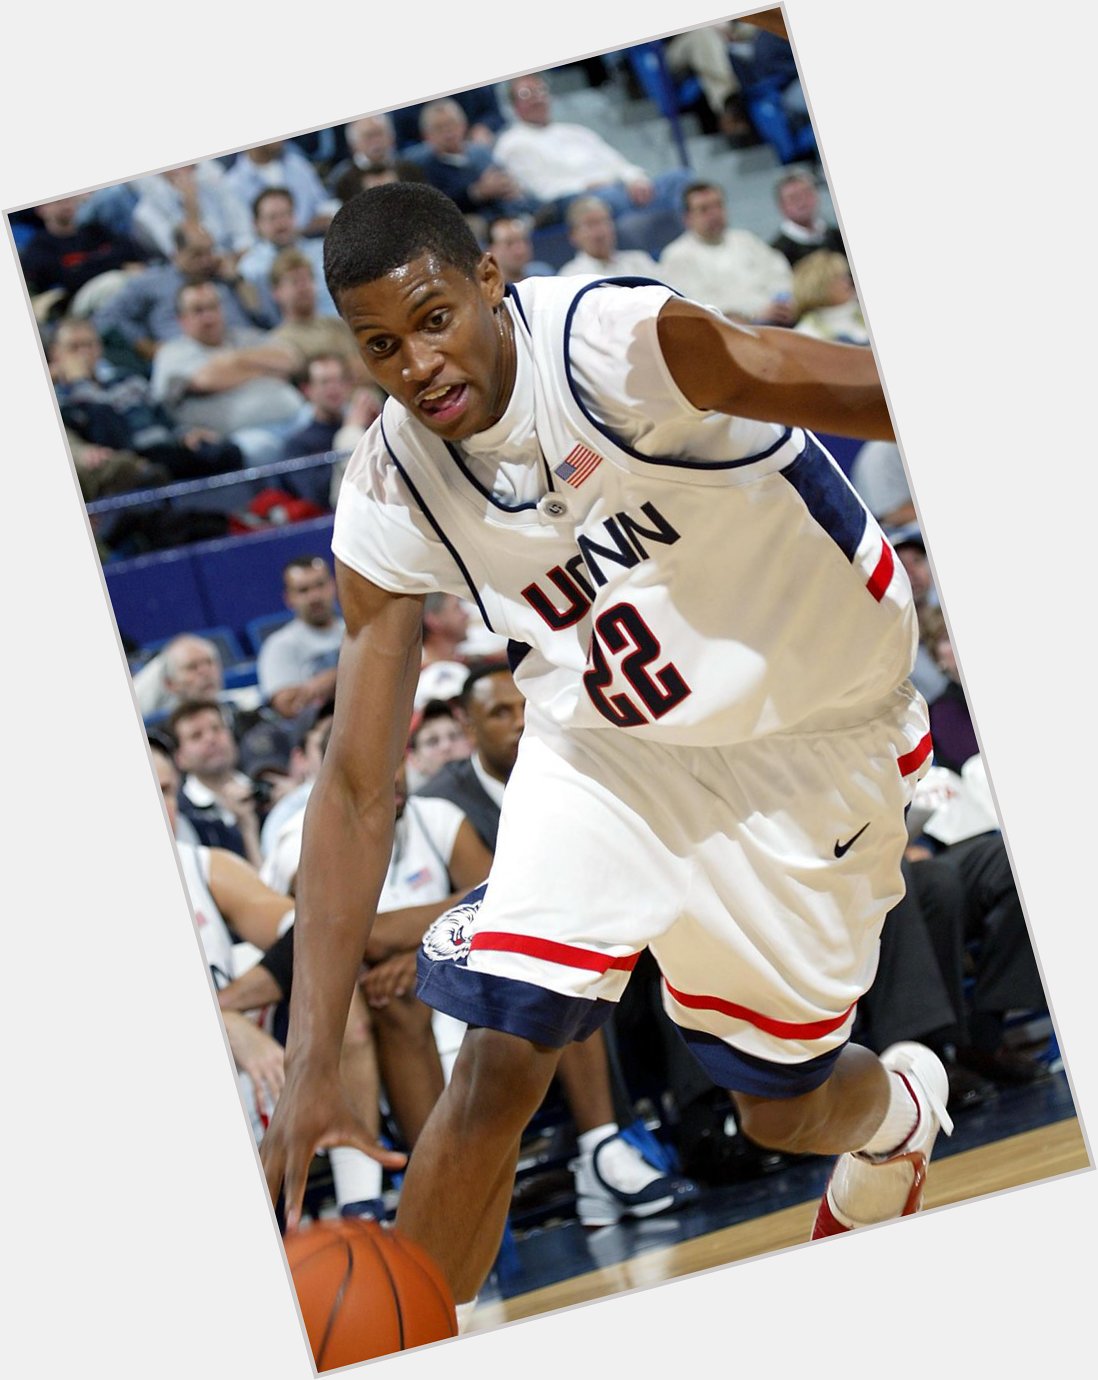 REmessage to wish a Happy Birthday to a great UConn Basketball player, Rudy Gay!  